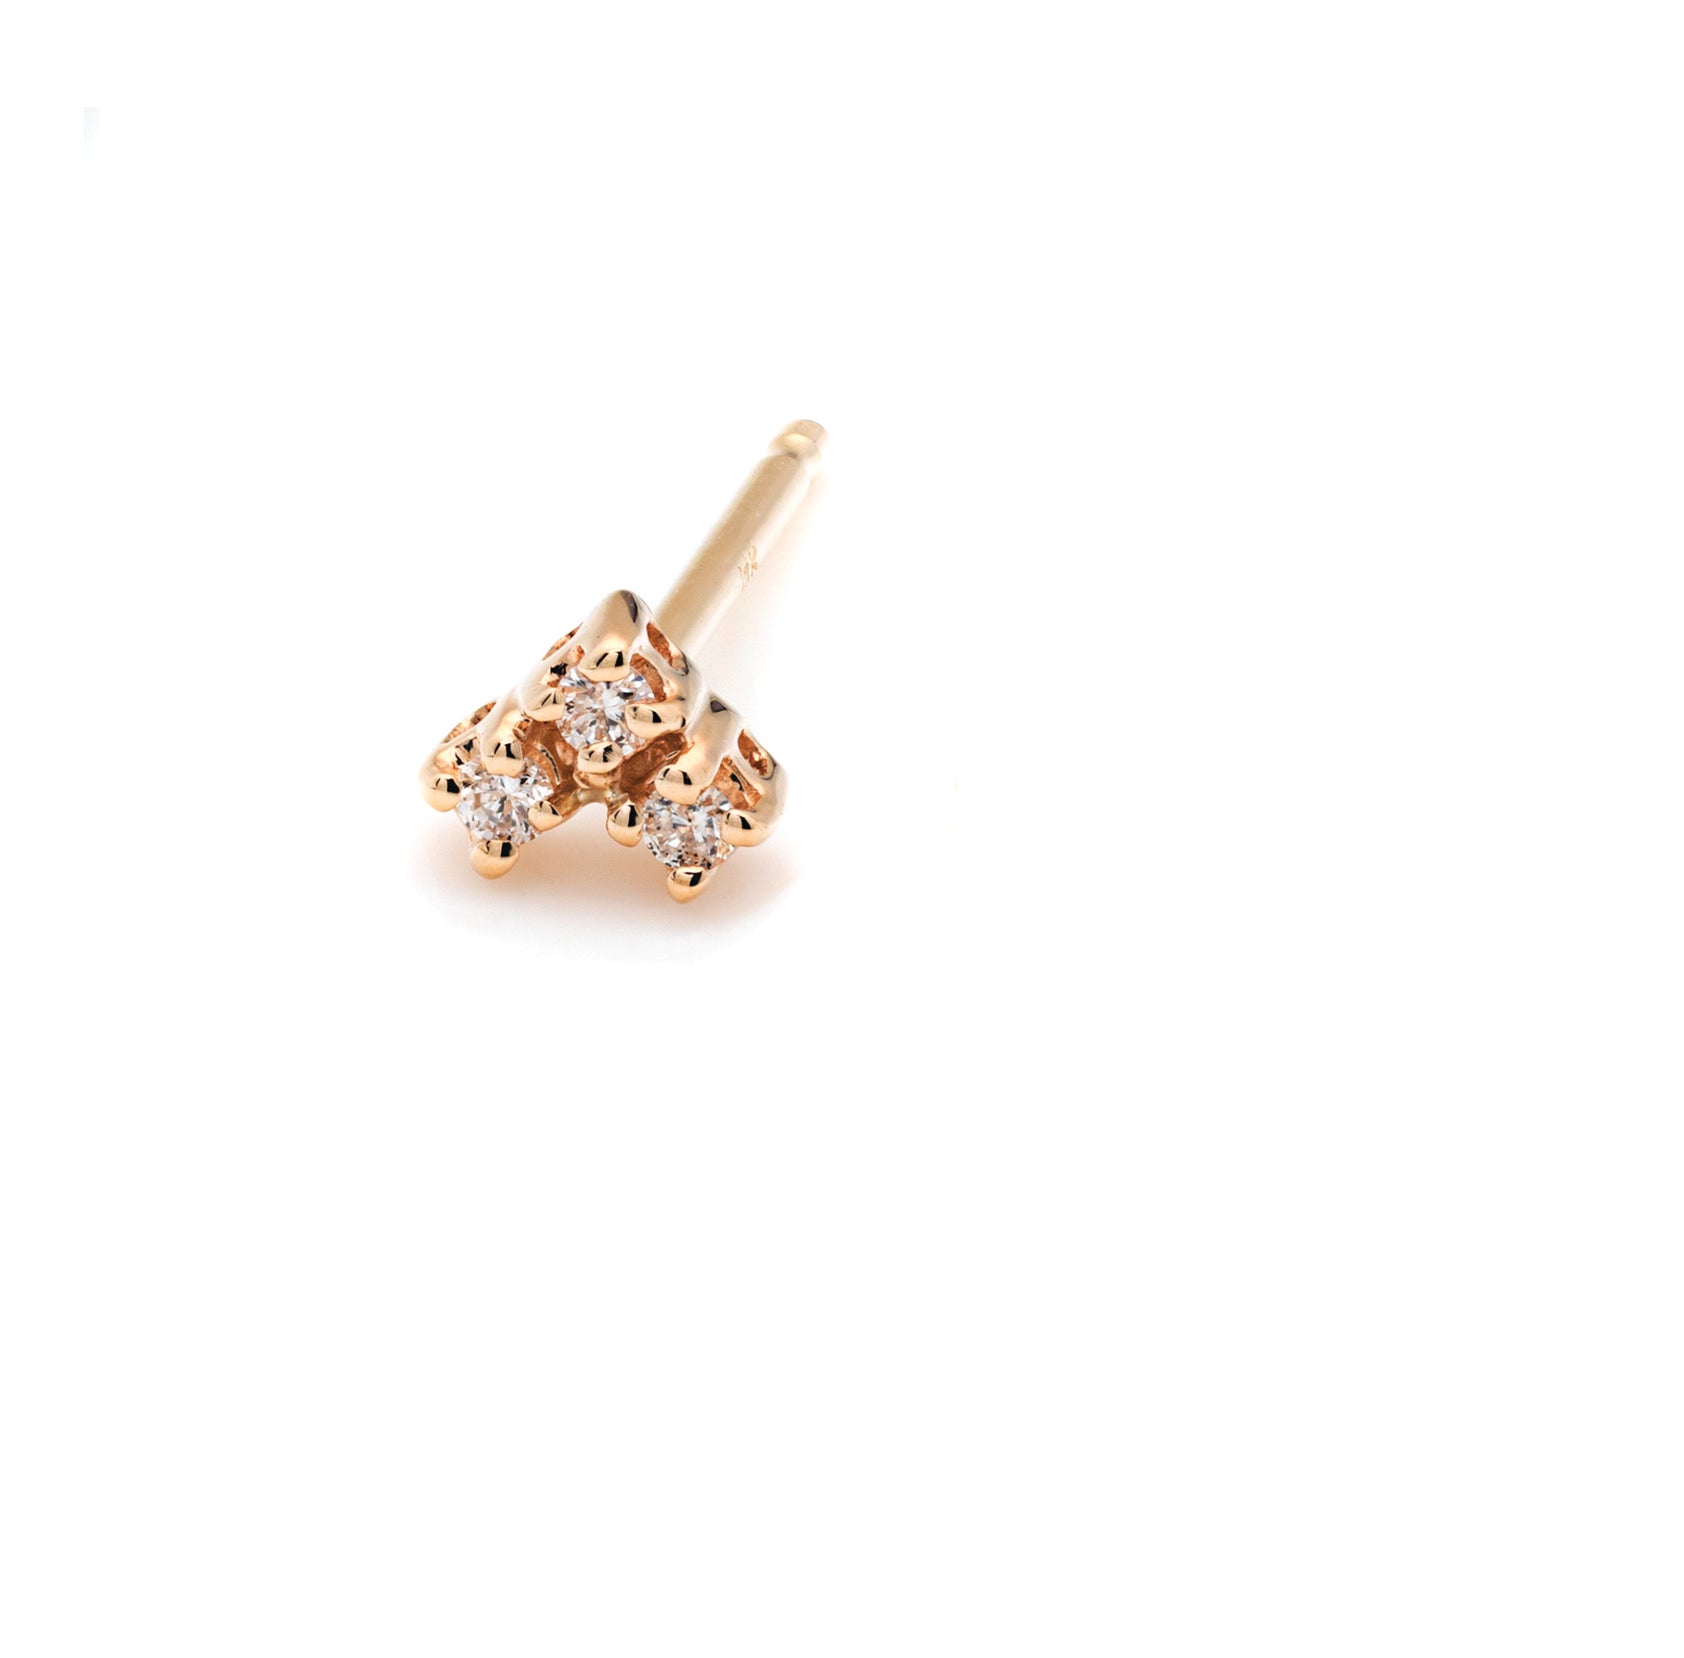 Mini white diamond trio stud earrings, post back,14k gold, ideal for multi piercing or update to the classic stud. made in nyc